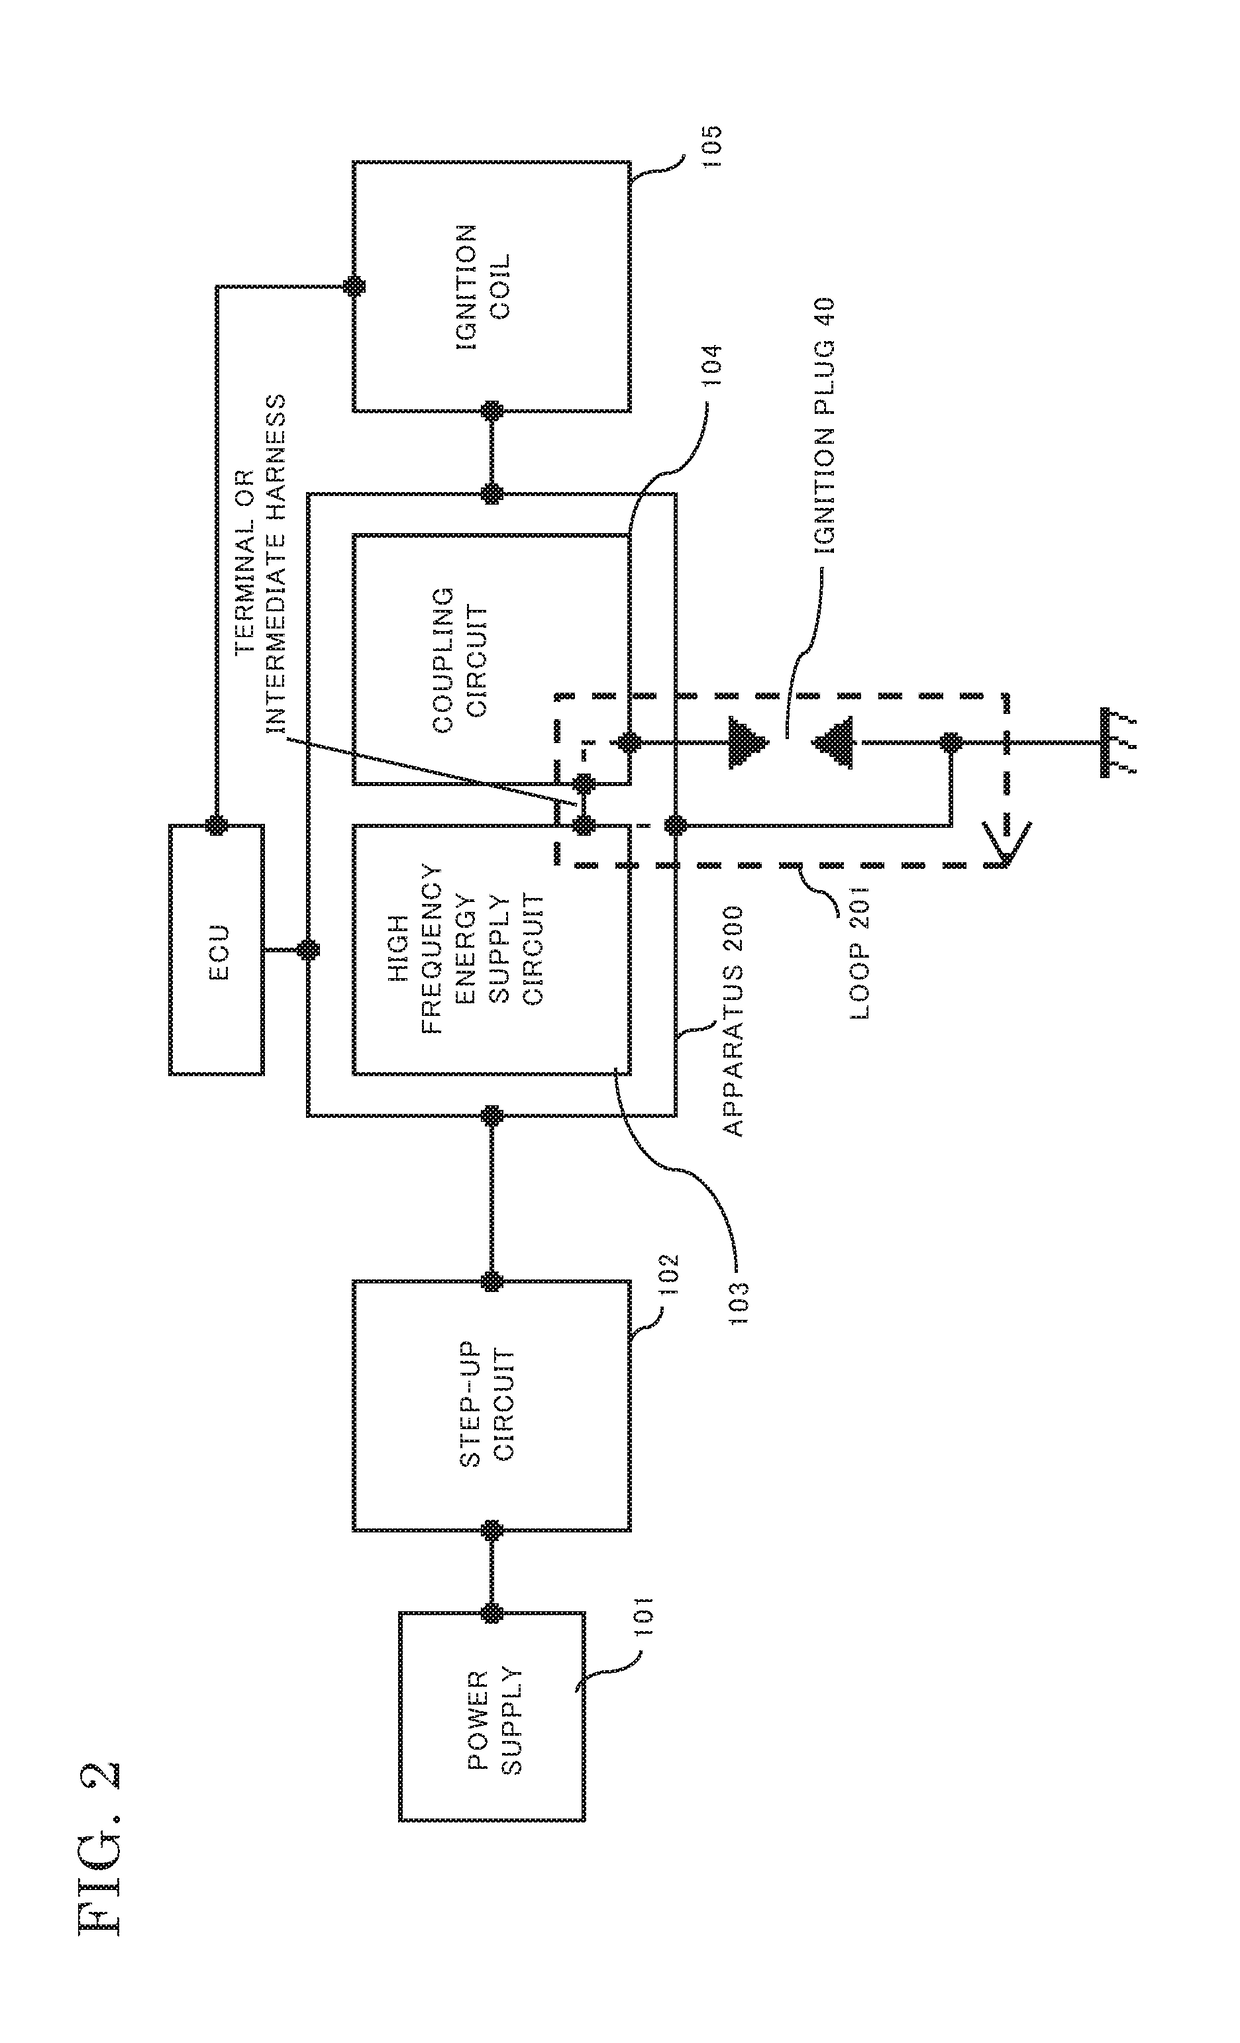 High frequency discharge ignition apparatus